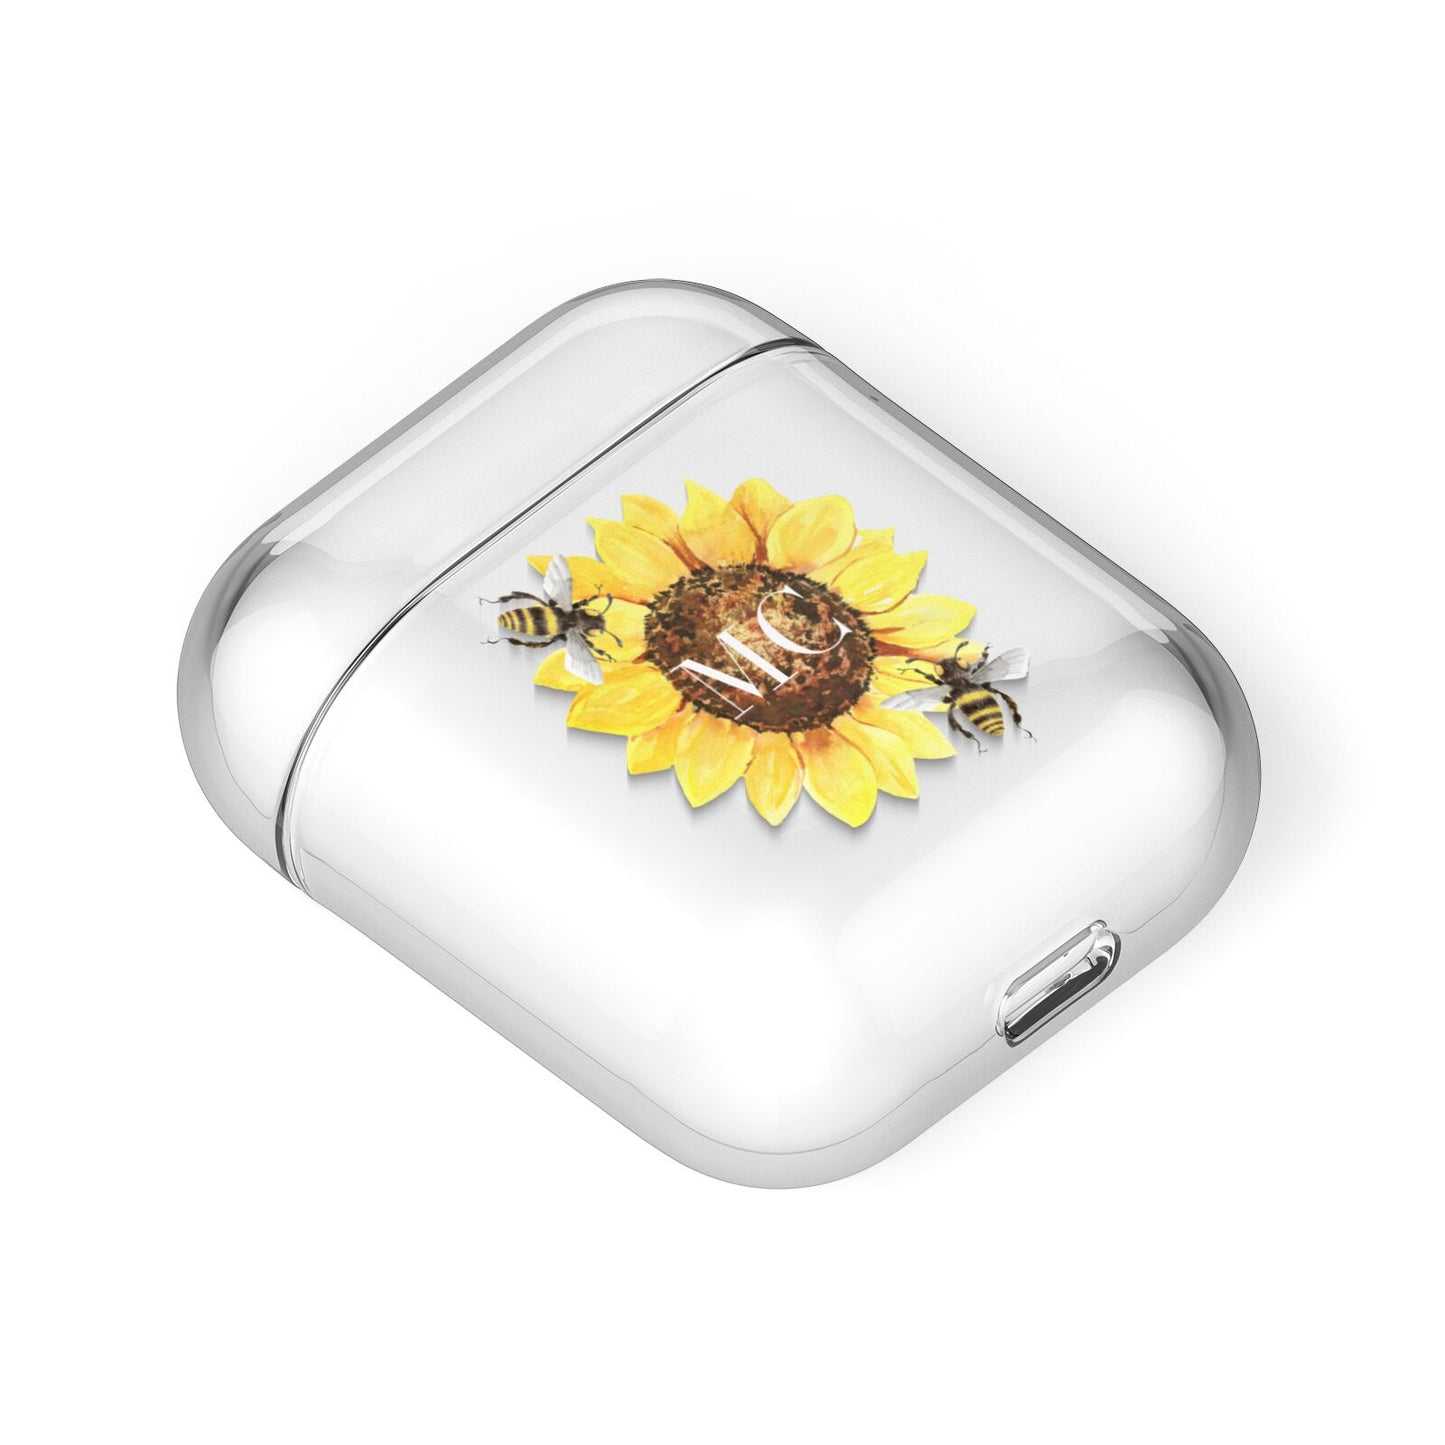 Monogrammed Sunflower with Little Bees AirPods Case Laid Flat